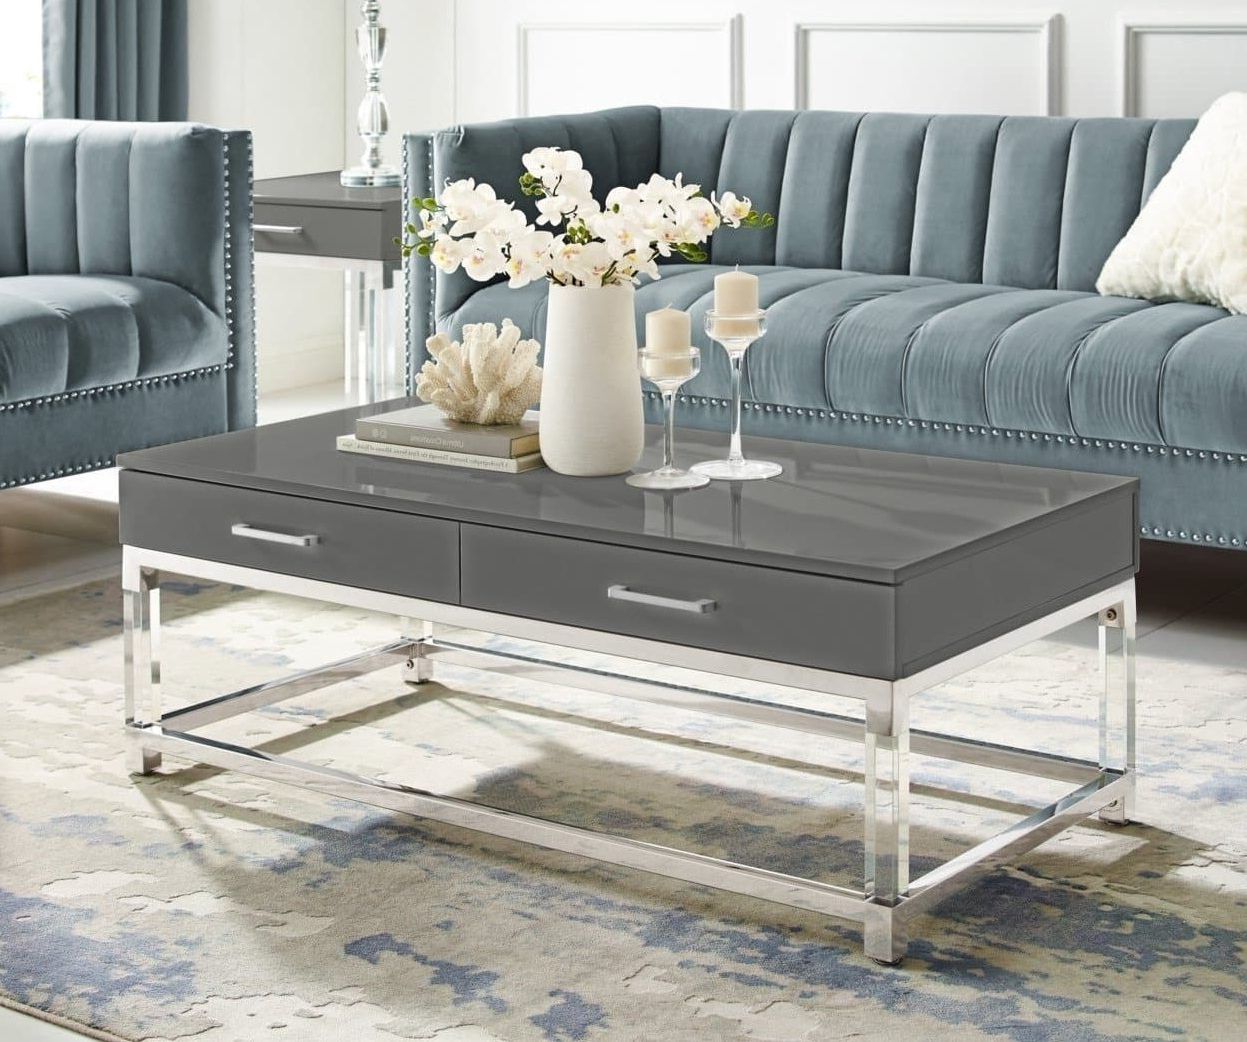 Well Liked Thick Acrylic Coffee Tables Regarding 21 Lucite Coffee Tables To Liven Your Living Room – Acrylic & See Through (View 6 of 20)